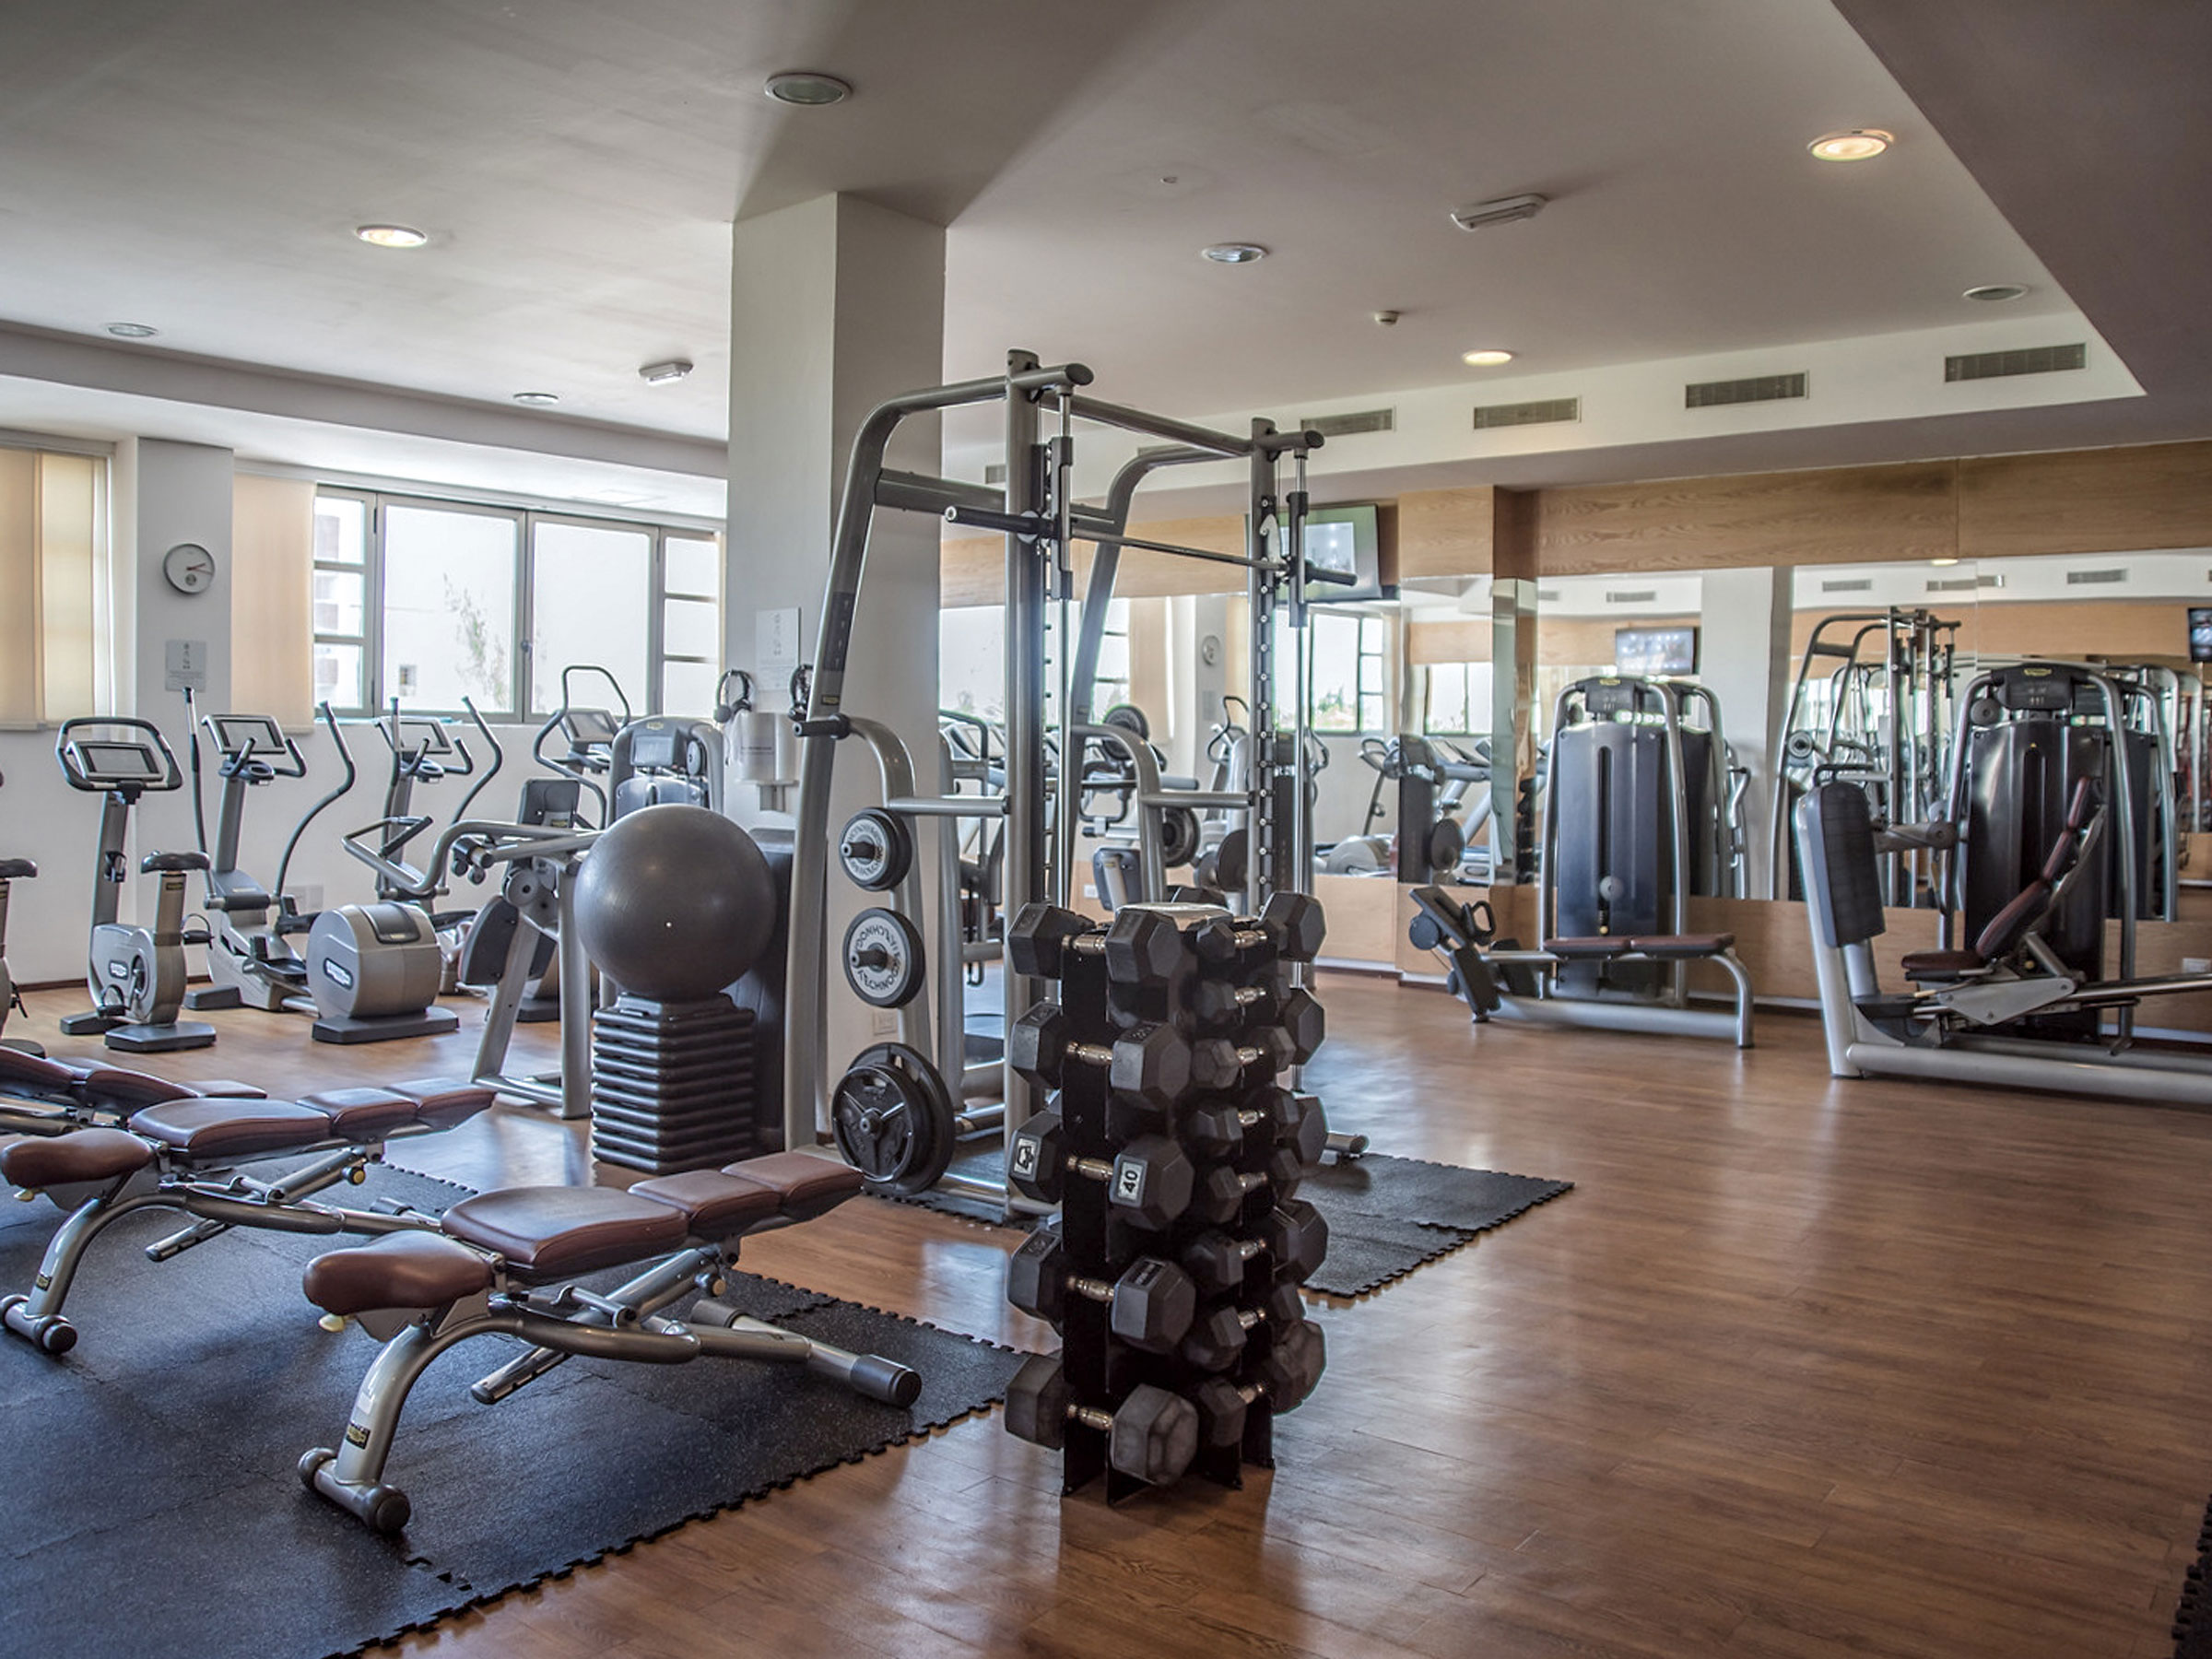 Beloved Playa Mujeres Hotel Fitness Center in Cancun